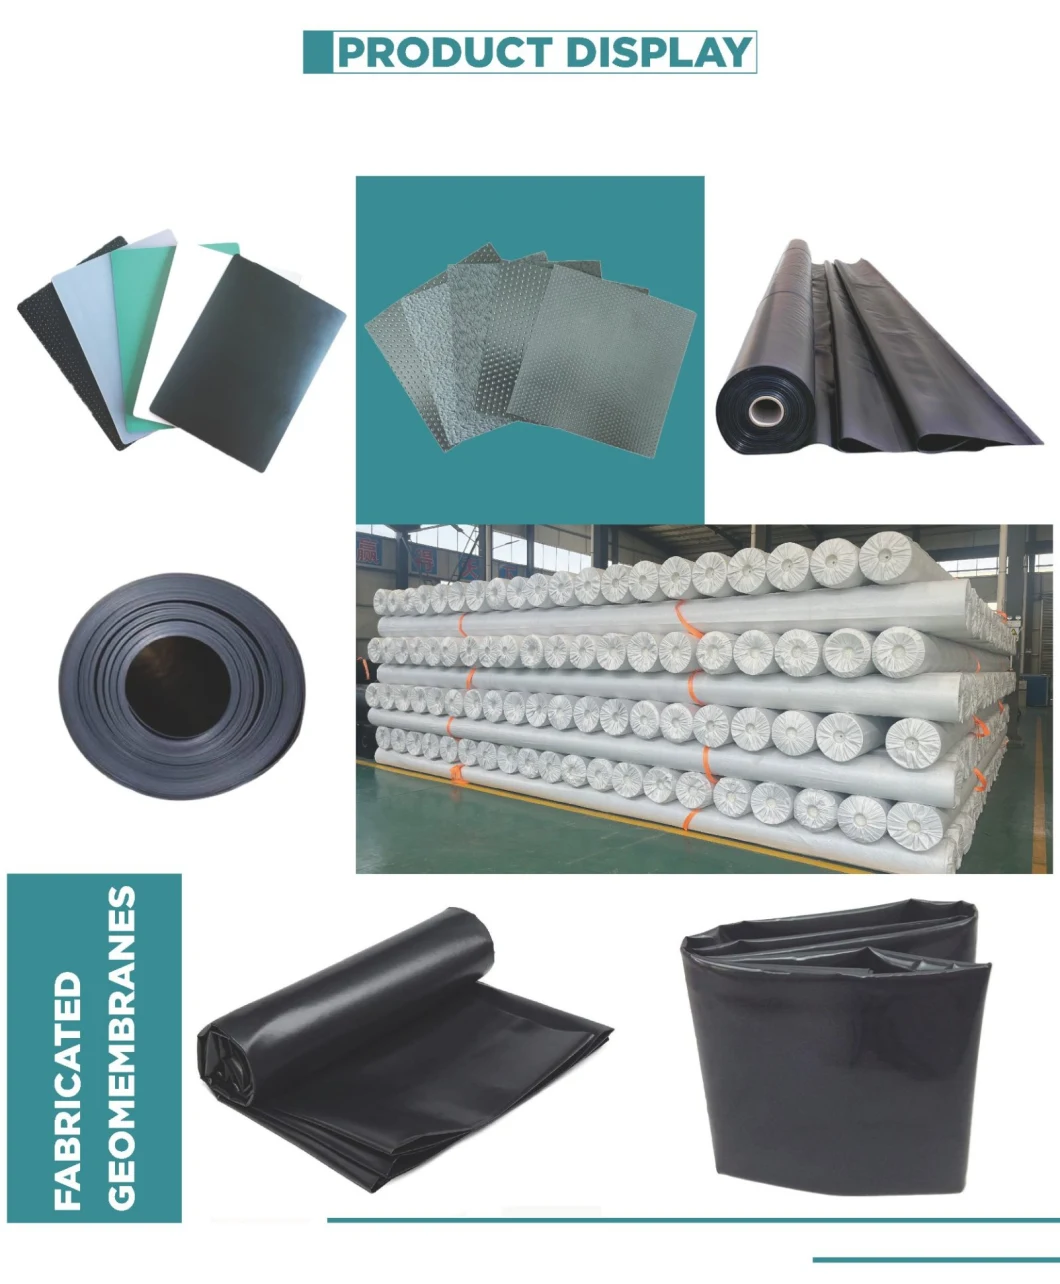 Plastic Film 0.5mm 1mm 2mm HDPE LDPE LLDPE Geomembrane Lining Pond Liner for Pool Lake River Aquaculture Agriculture Dam Landfill Fish Farming Tank Price